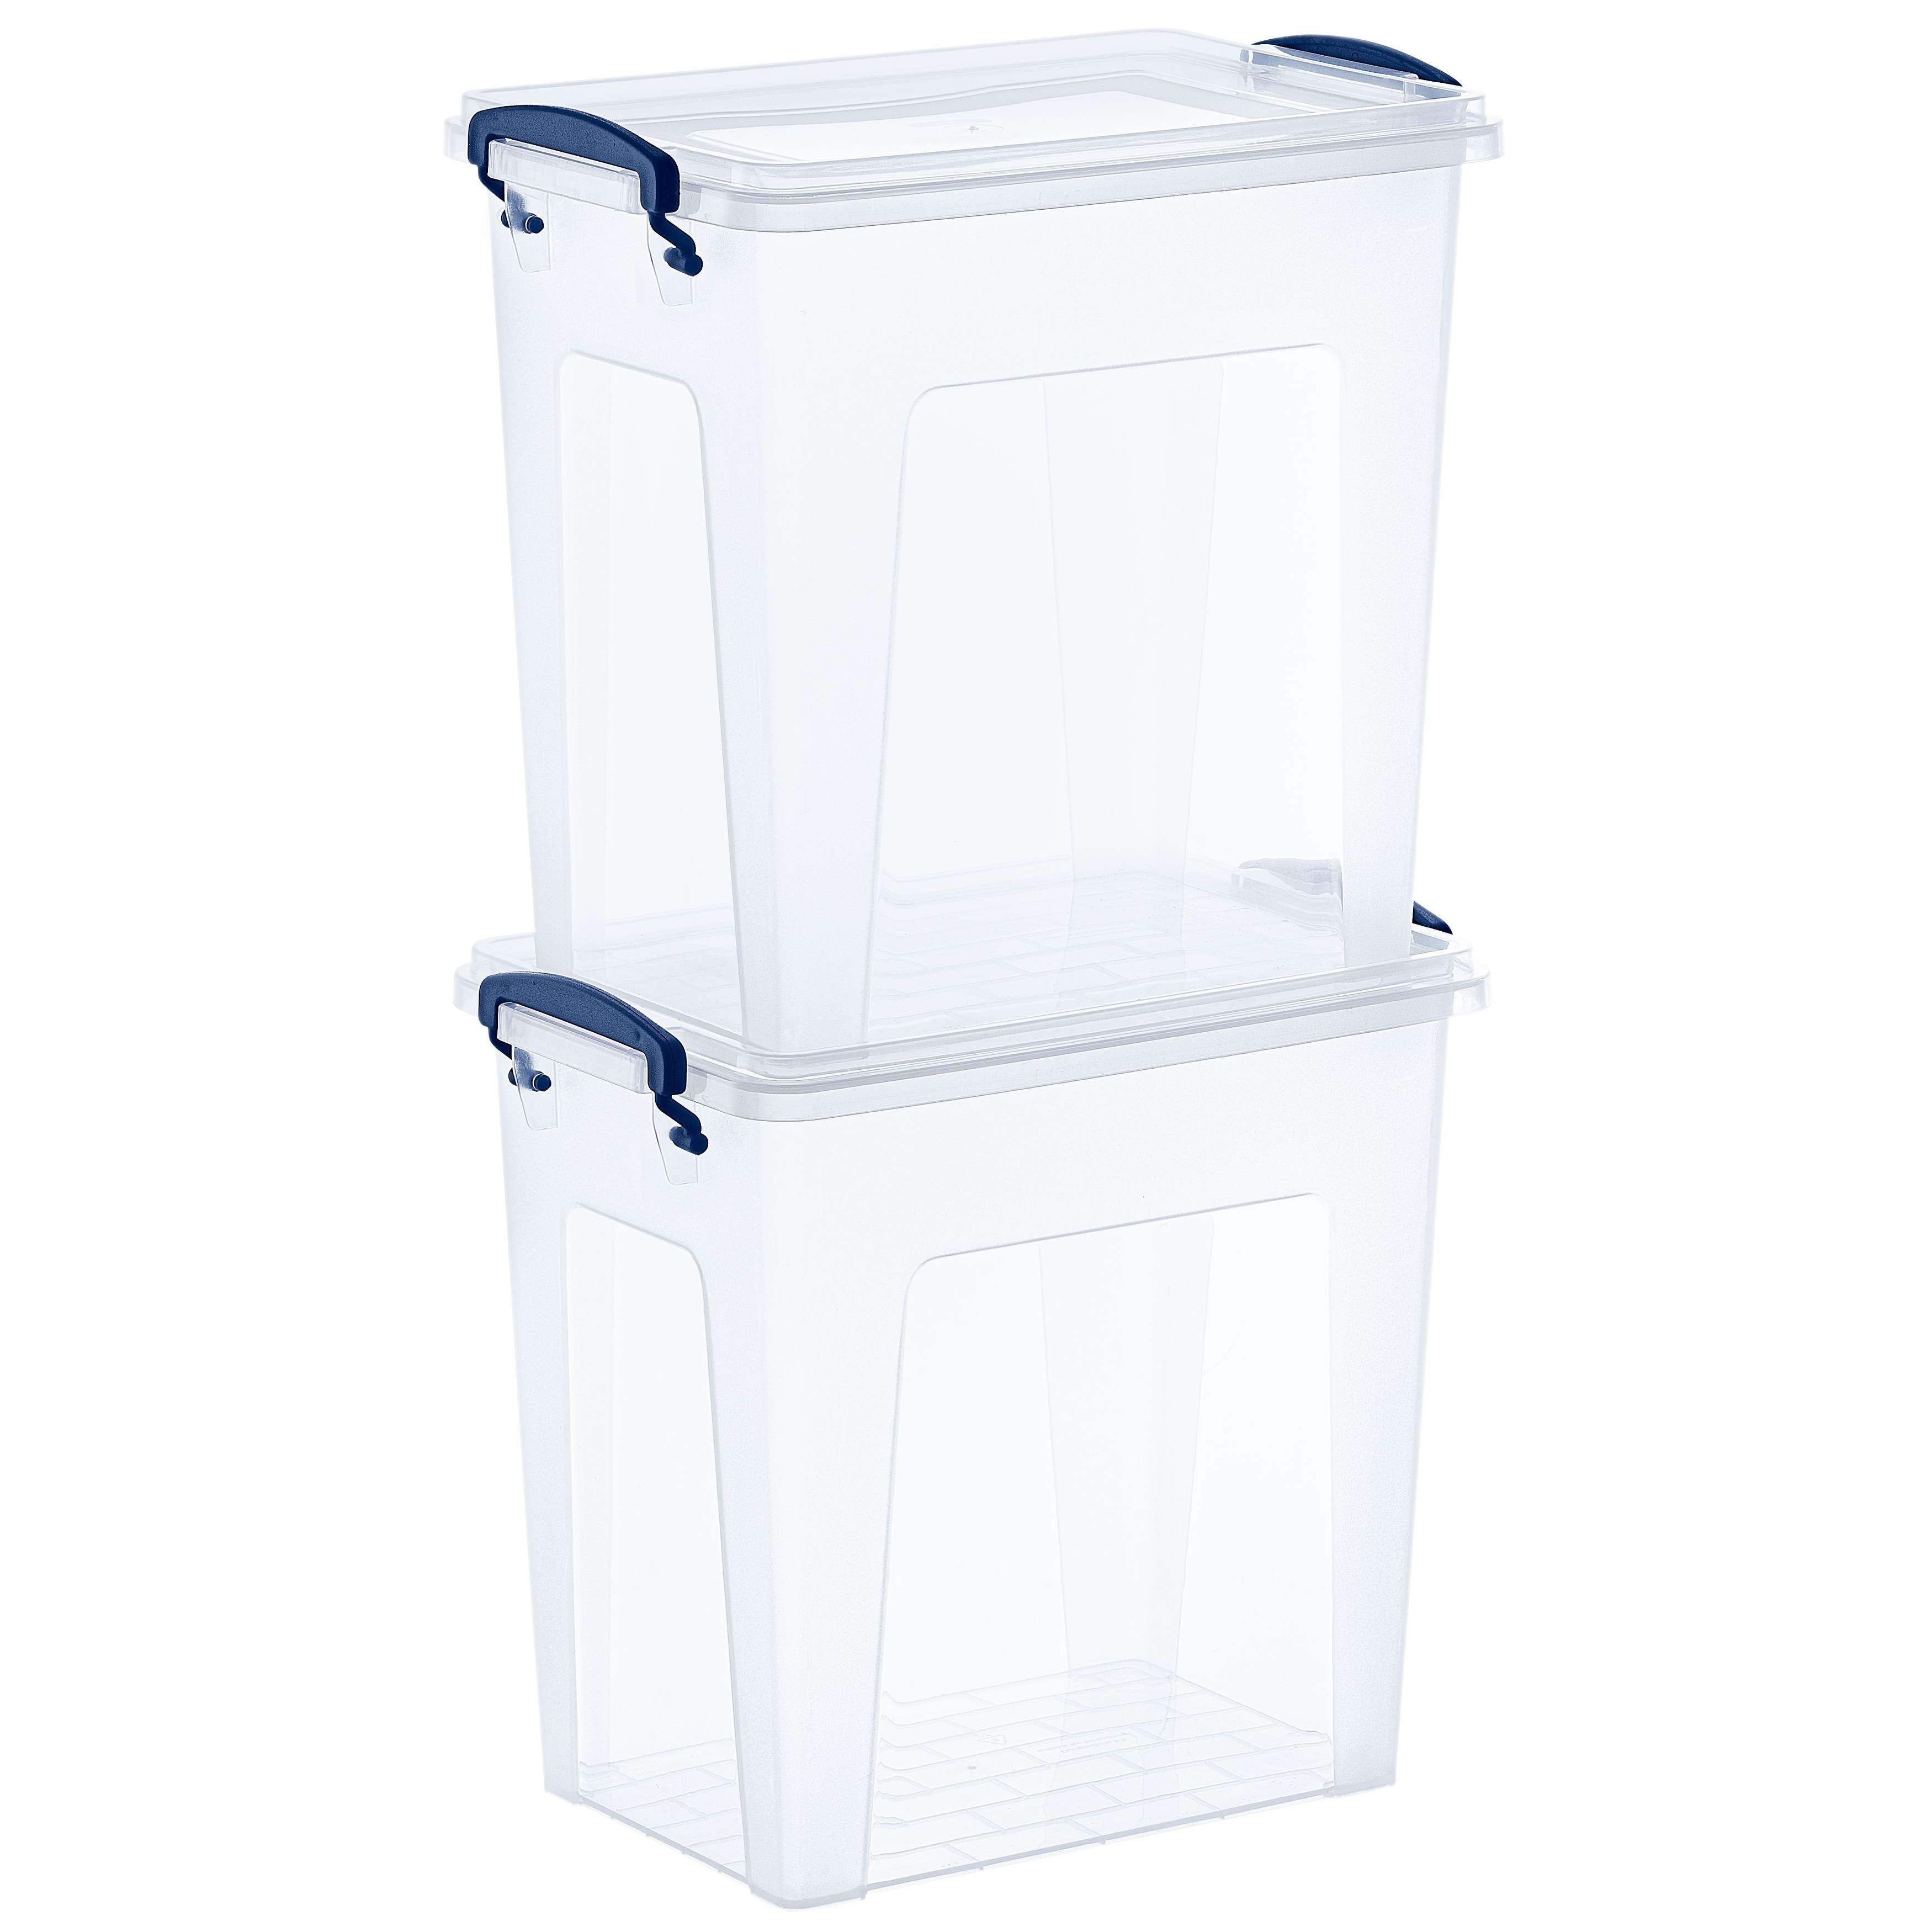 https://ak1.ostkcdn.com/images/products/is/images/direct/8309ebaeb805e10b1910b4b8464e8aea614c3b39/Clear-Storage-Boxes-with-Lids-%282-Pack%29.jpg